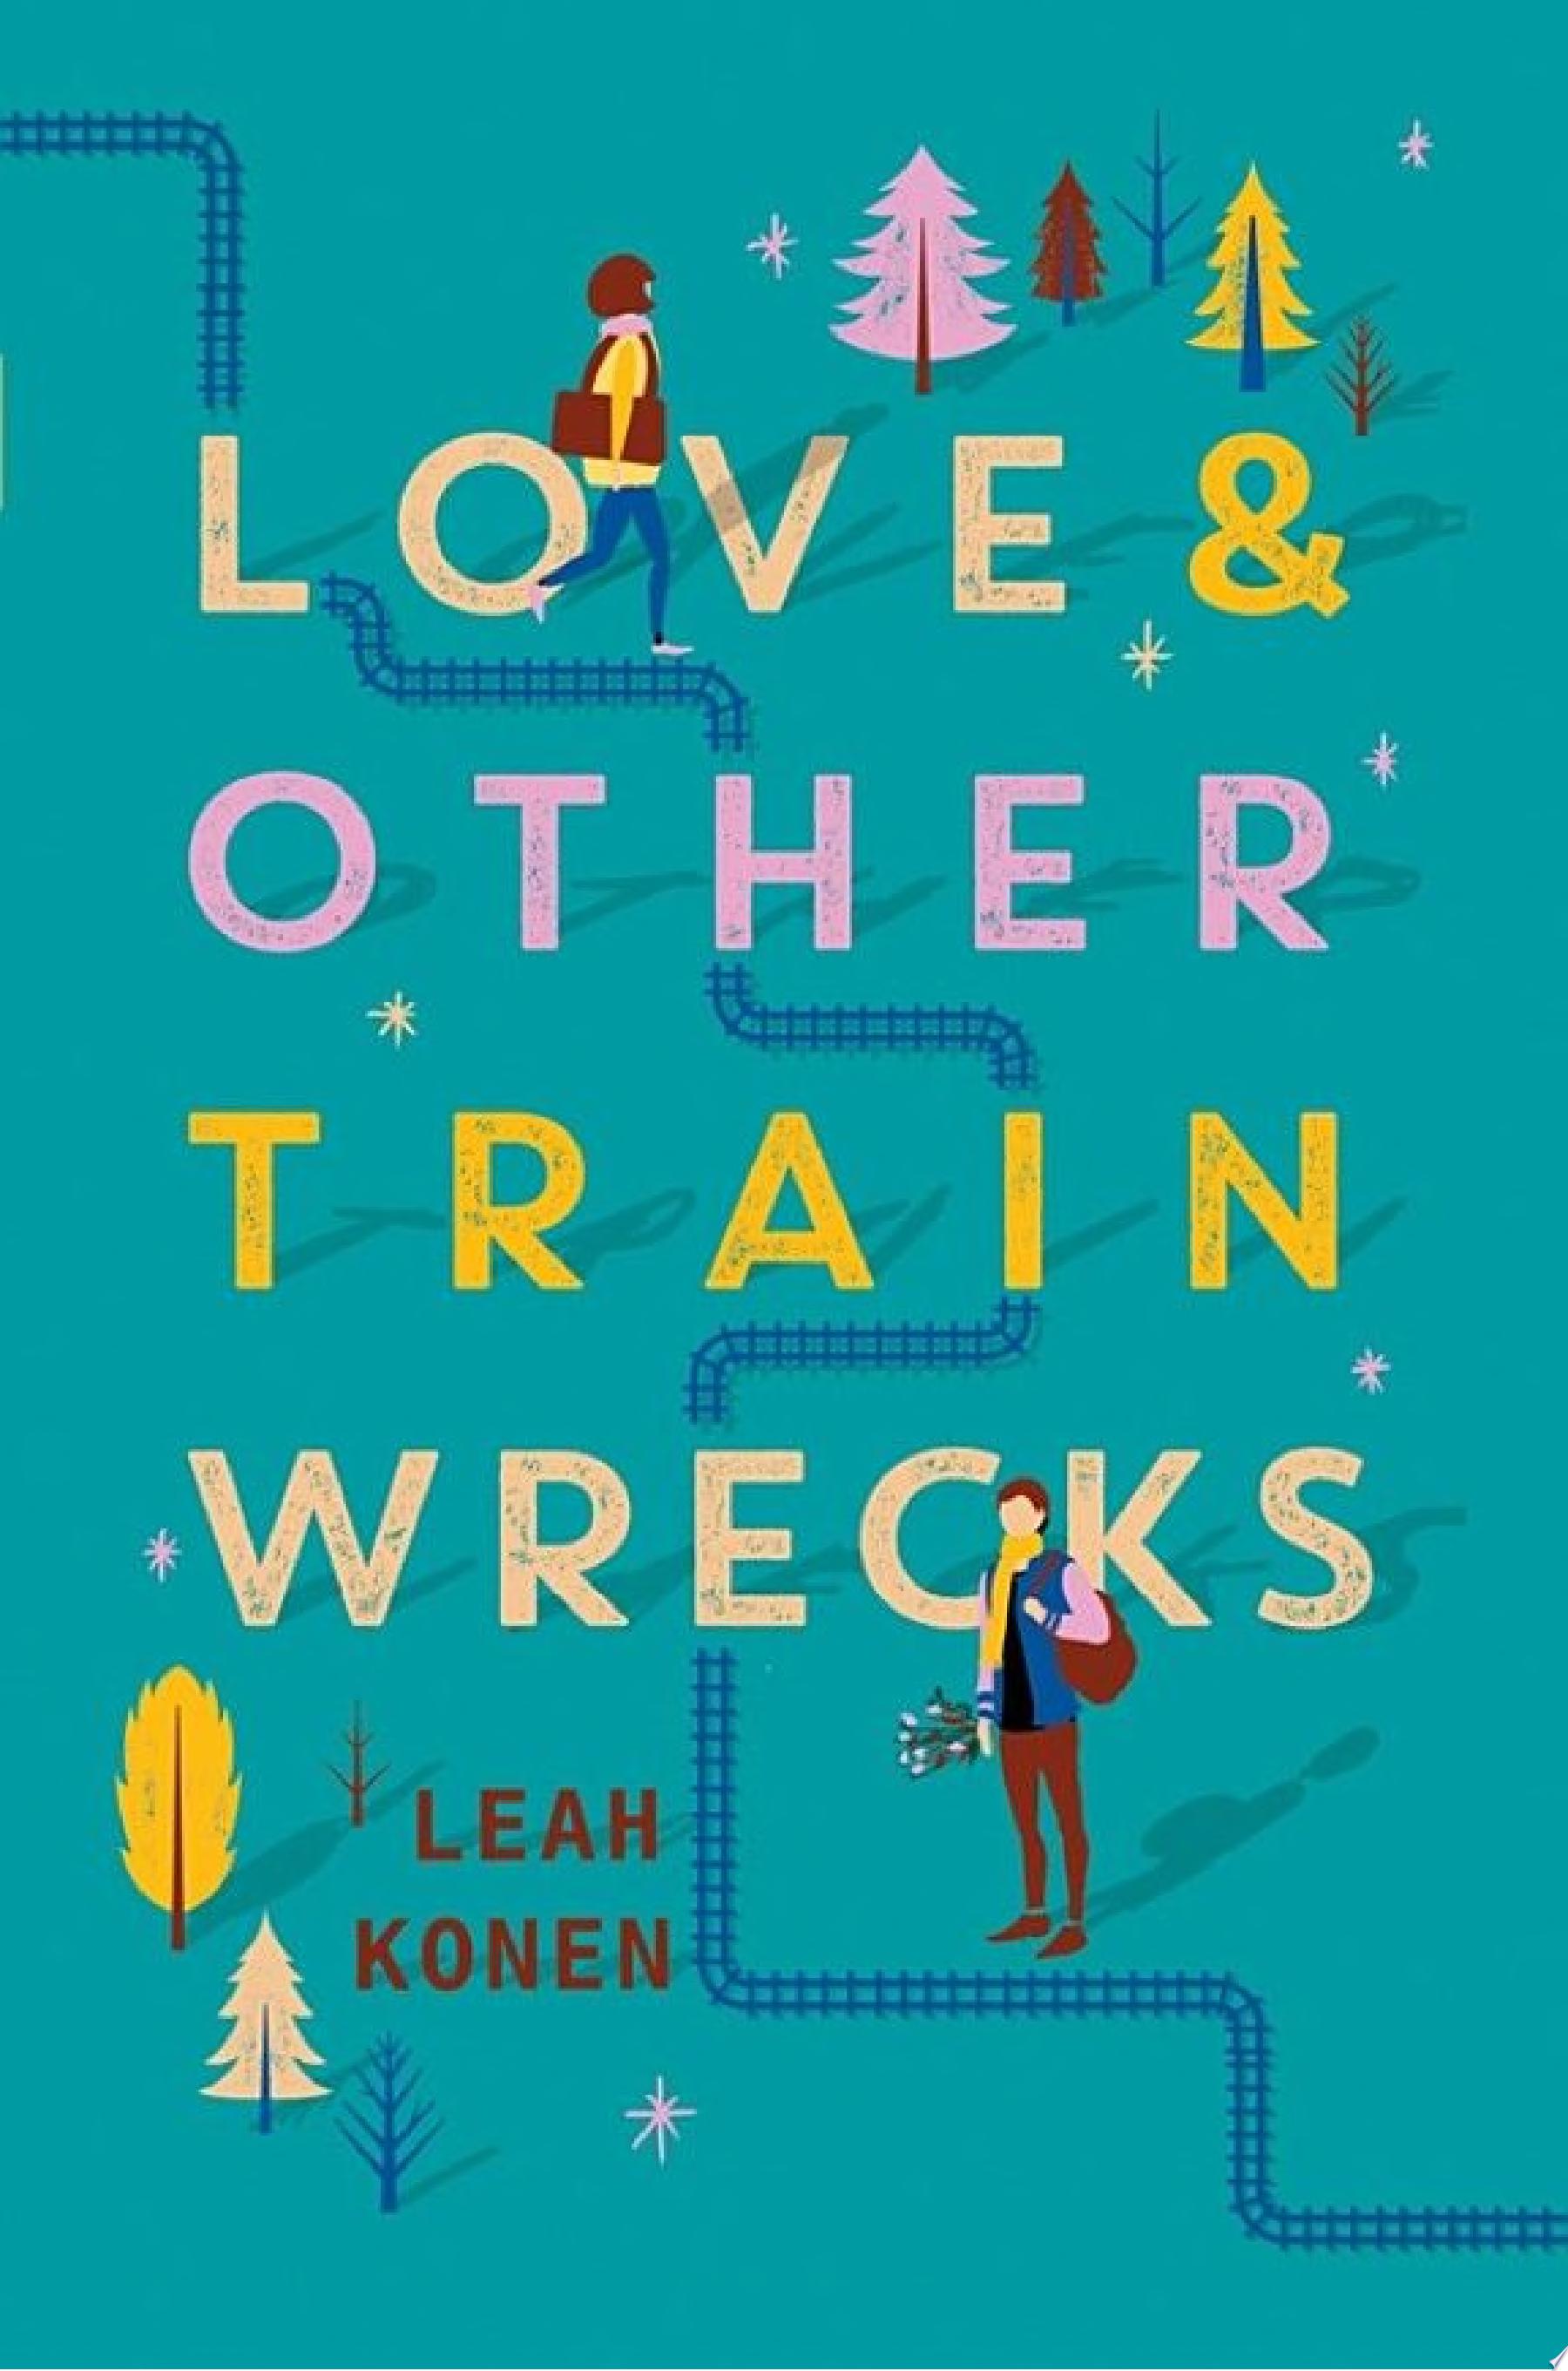 Image for "Love and Other Train Wrecks"